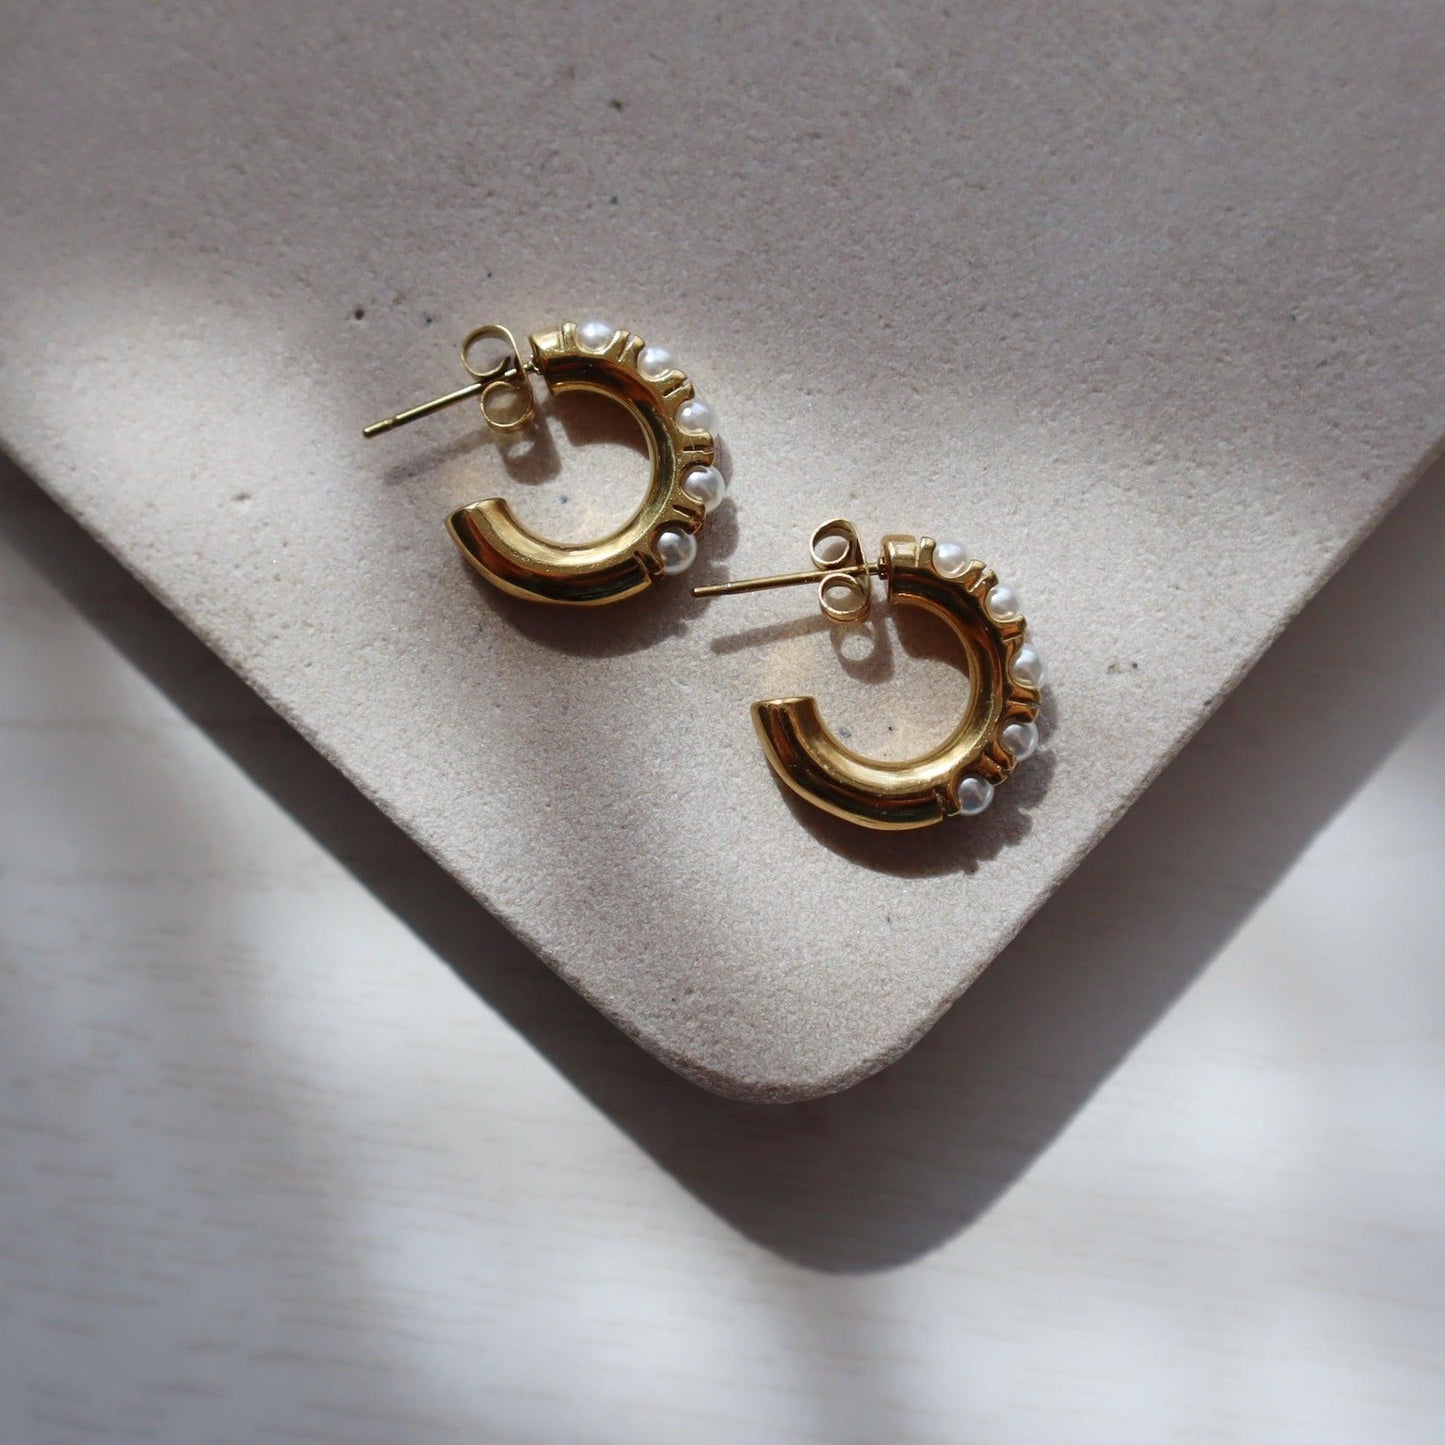 Nori Hoops | Pearl Hoop Earrings - JESSA JEWELRY | GOLD JEWELRY; dainty, affordable gold everyday jewelry. Tarnish free, water-resistant, hypoallergenic. Jewelry for everyday wear